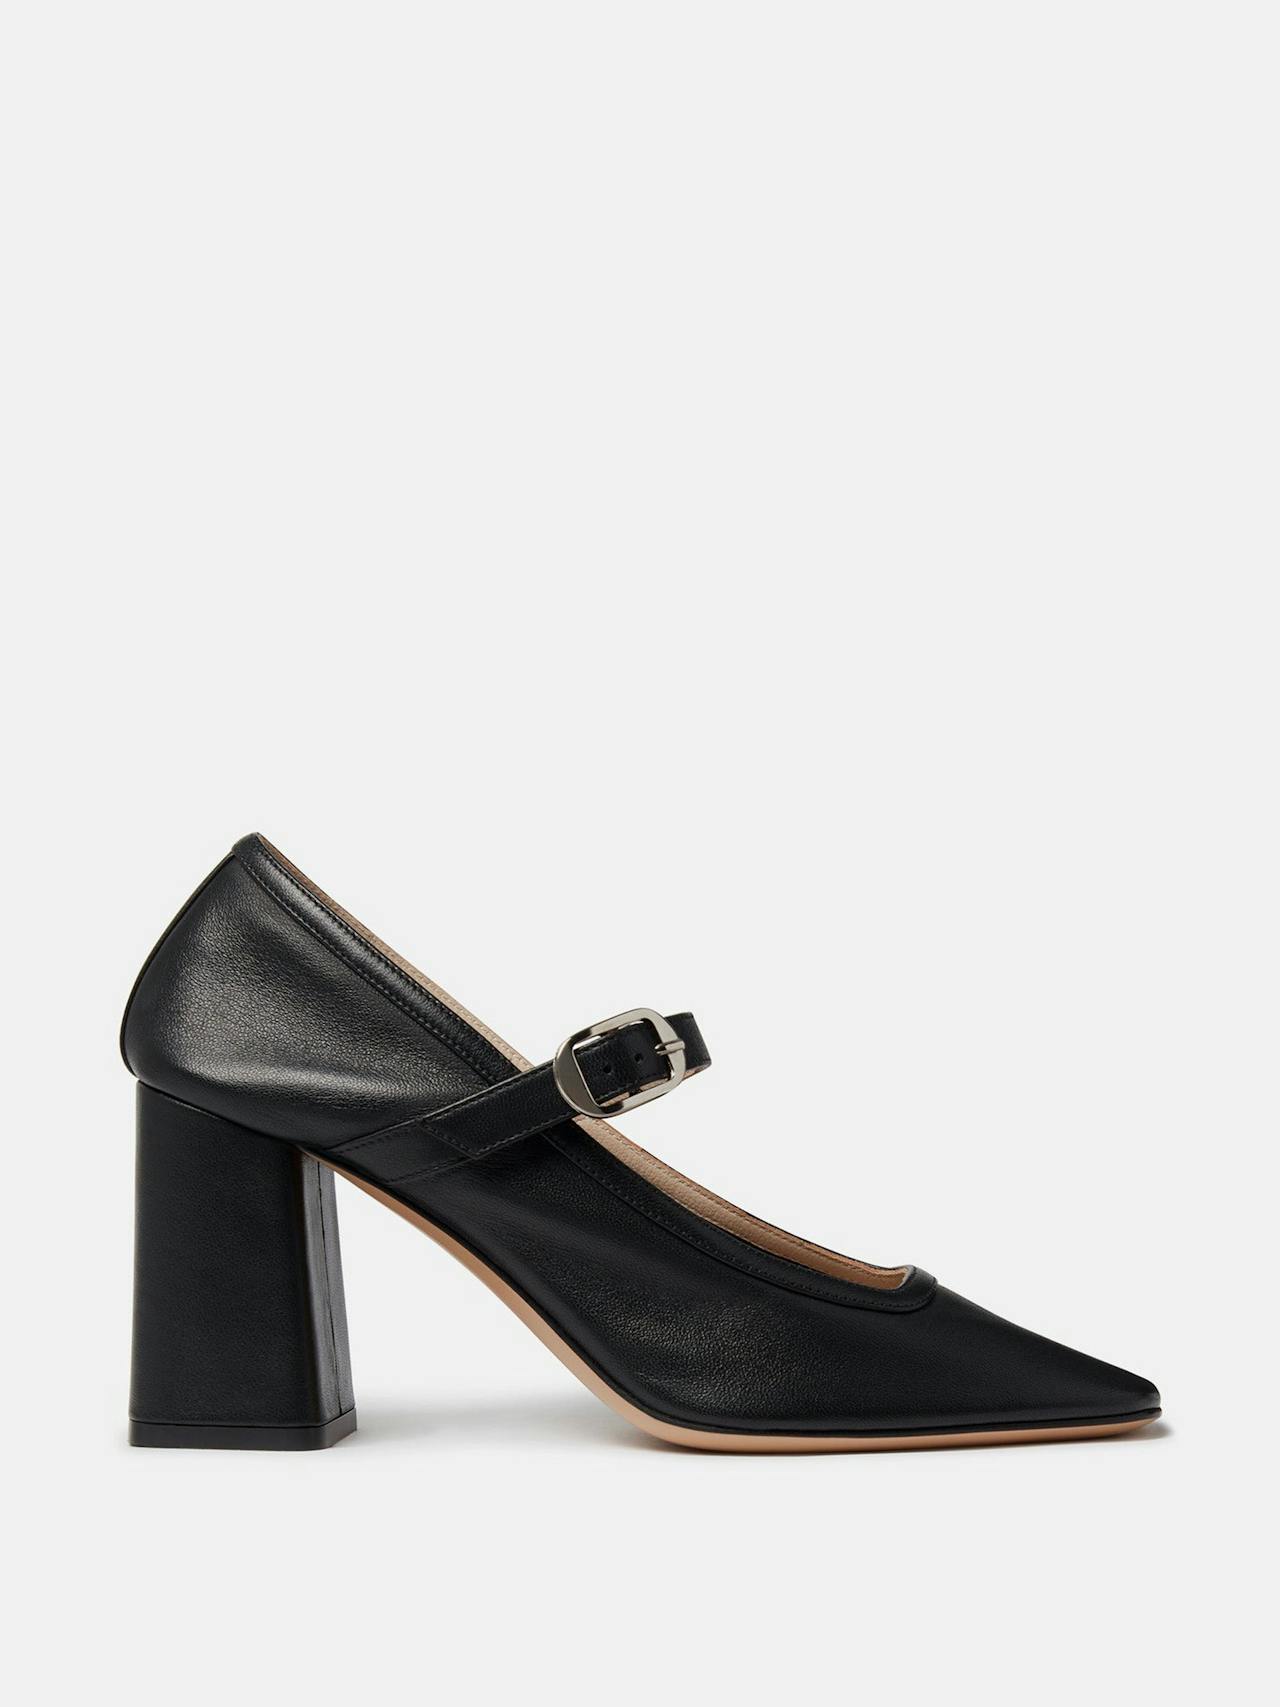 Black leather ballet Mary Jane pumps